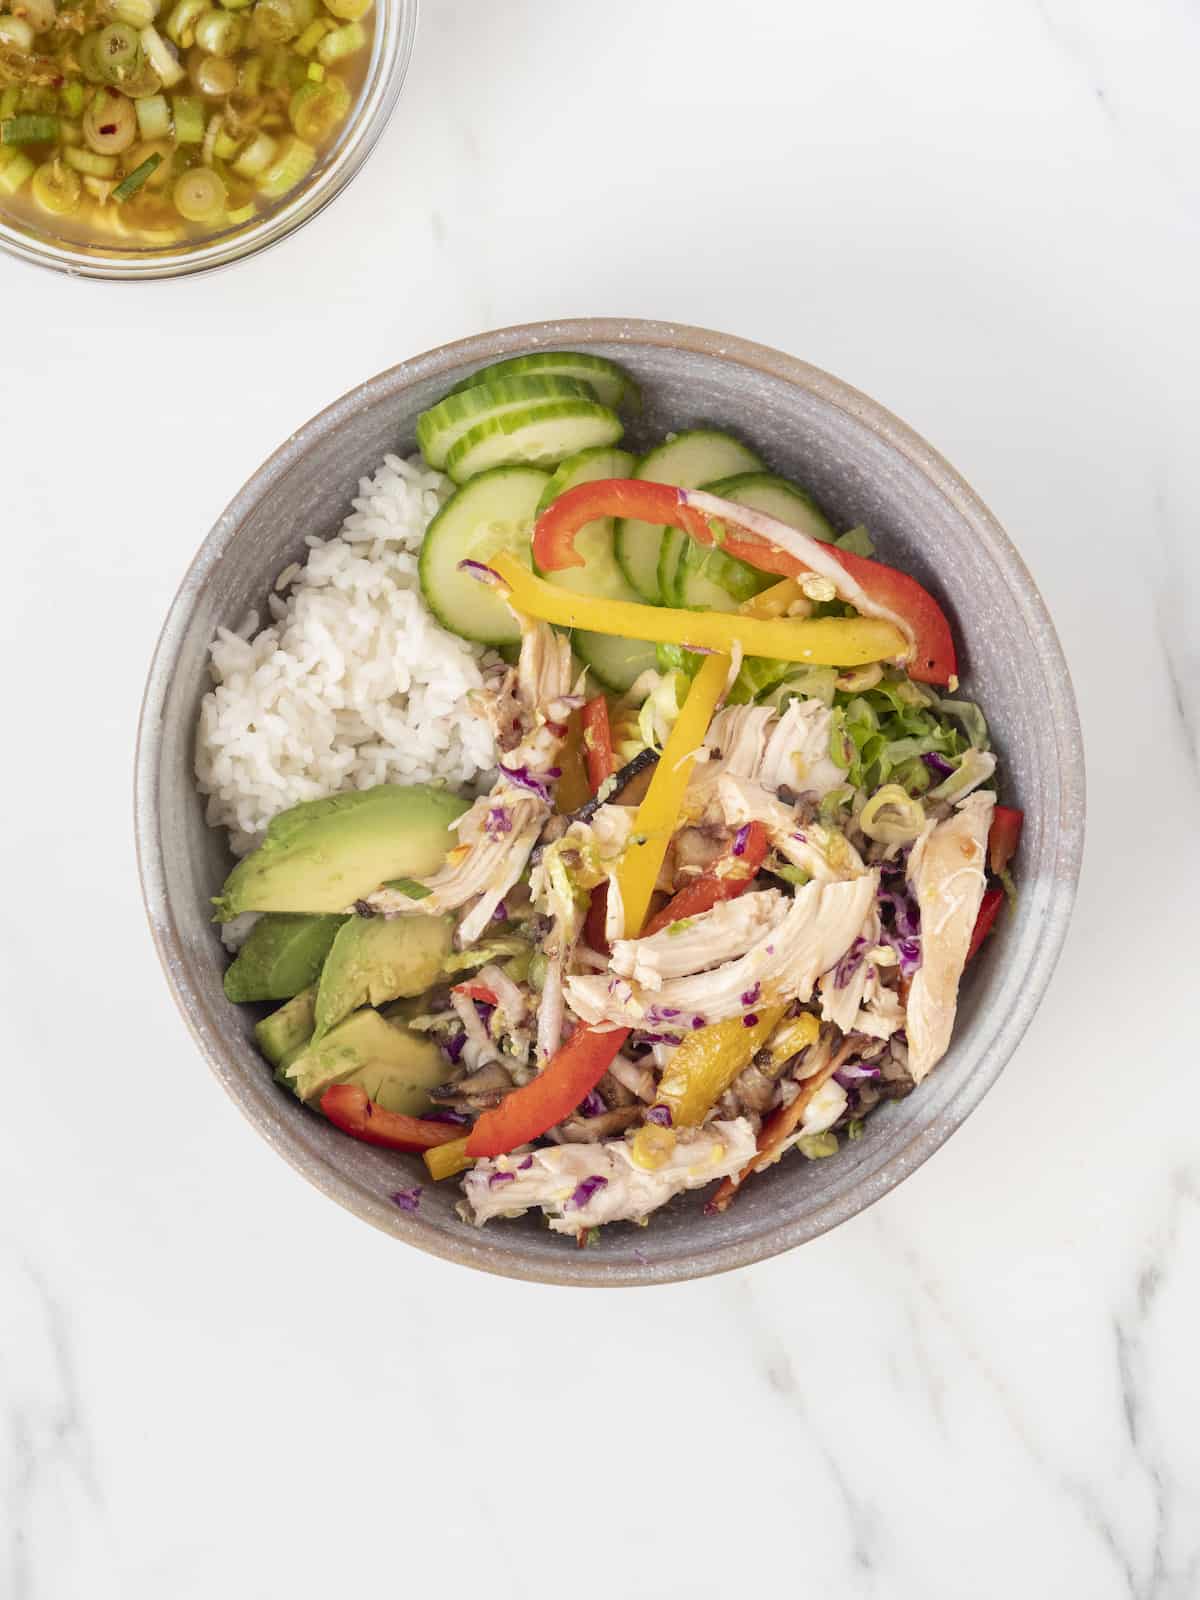 A grey ceramic bowl with white rice at the bottom, topped with the chicken-vegetable mixture, sliced avocados, shredded lettuce and sliced cucumbers.